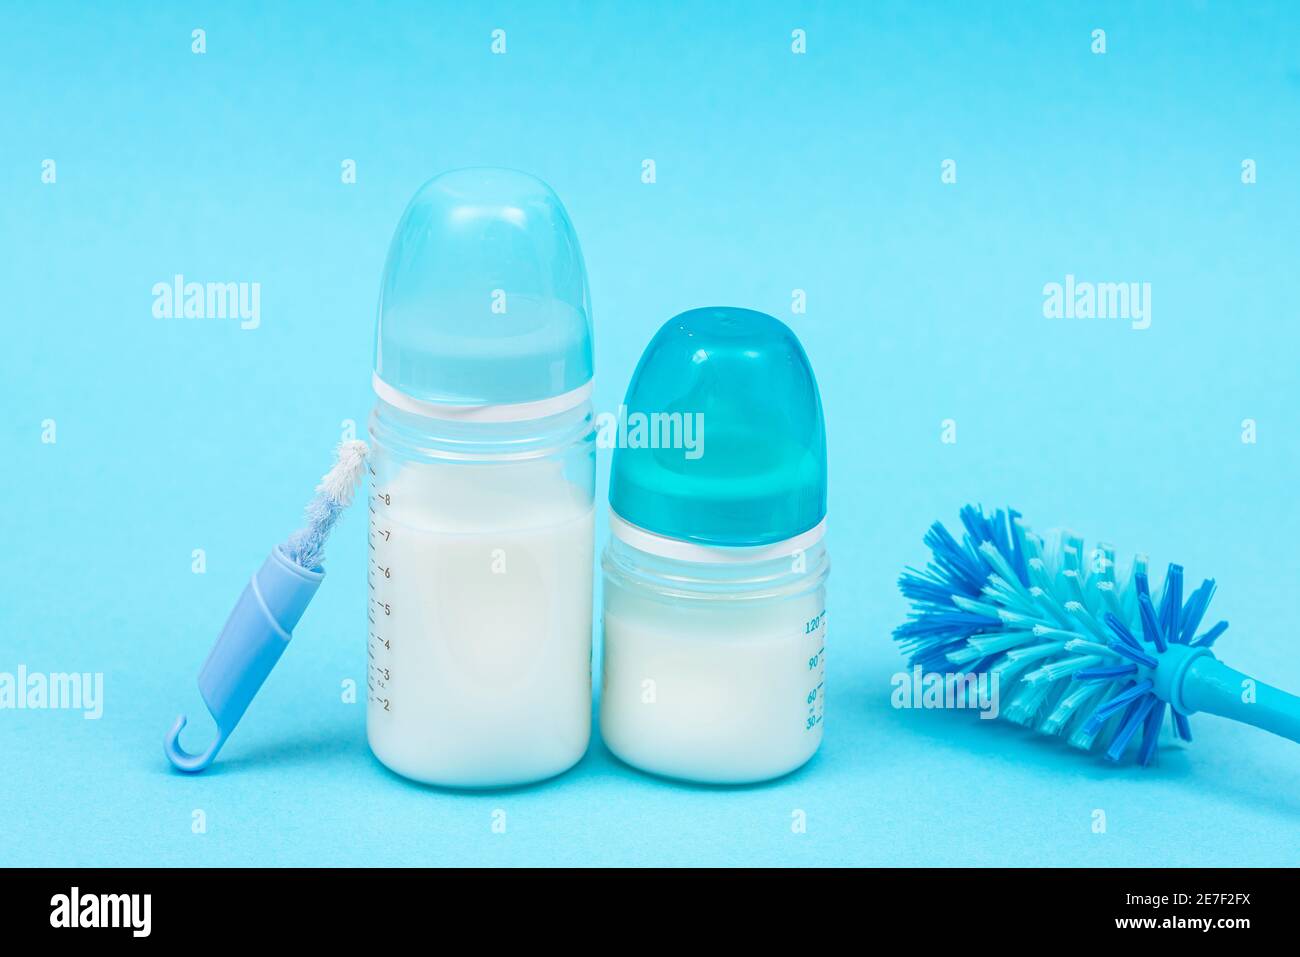 Baby bottles with milk and nipples bottle brush accessories on blue background. Baby products, symbols for newborns Stock Photo